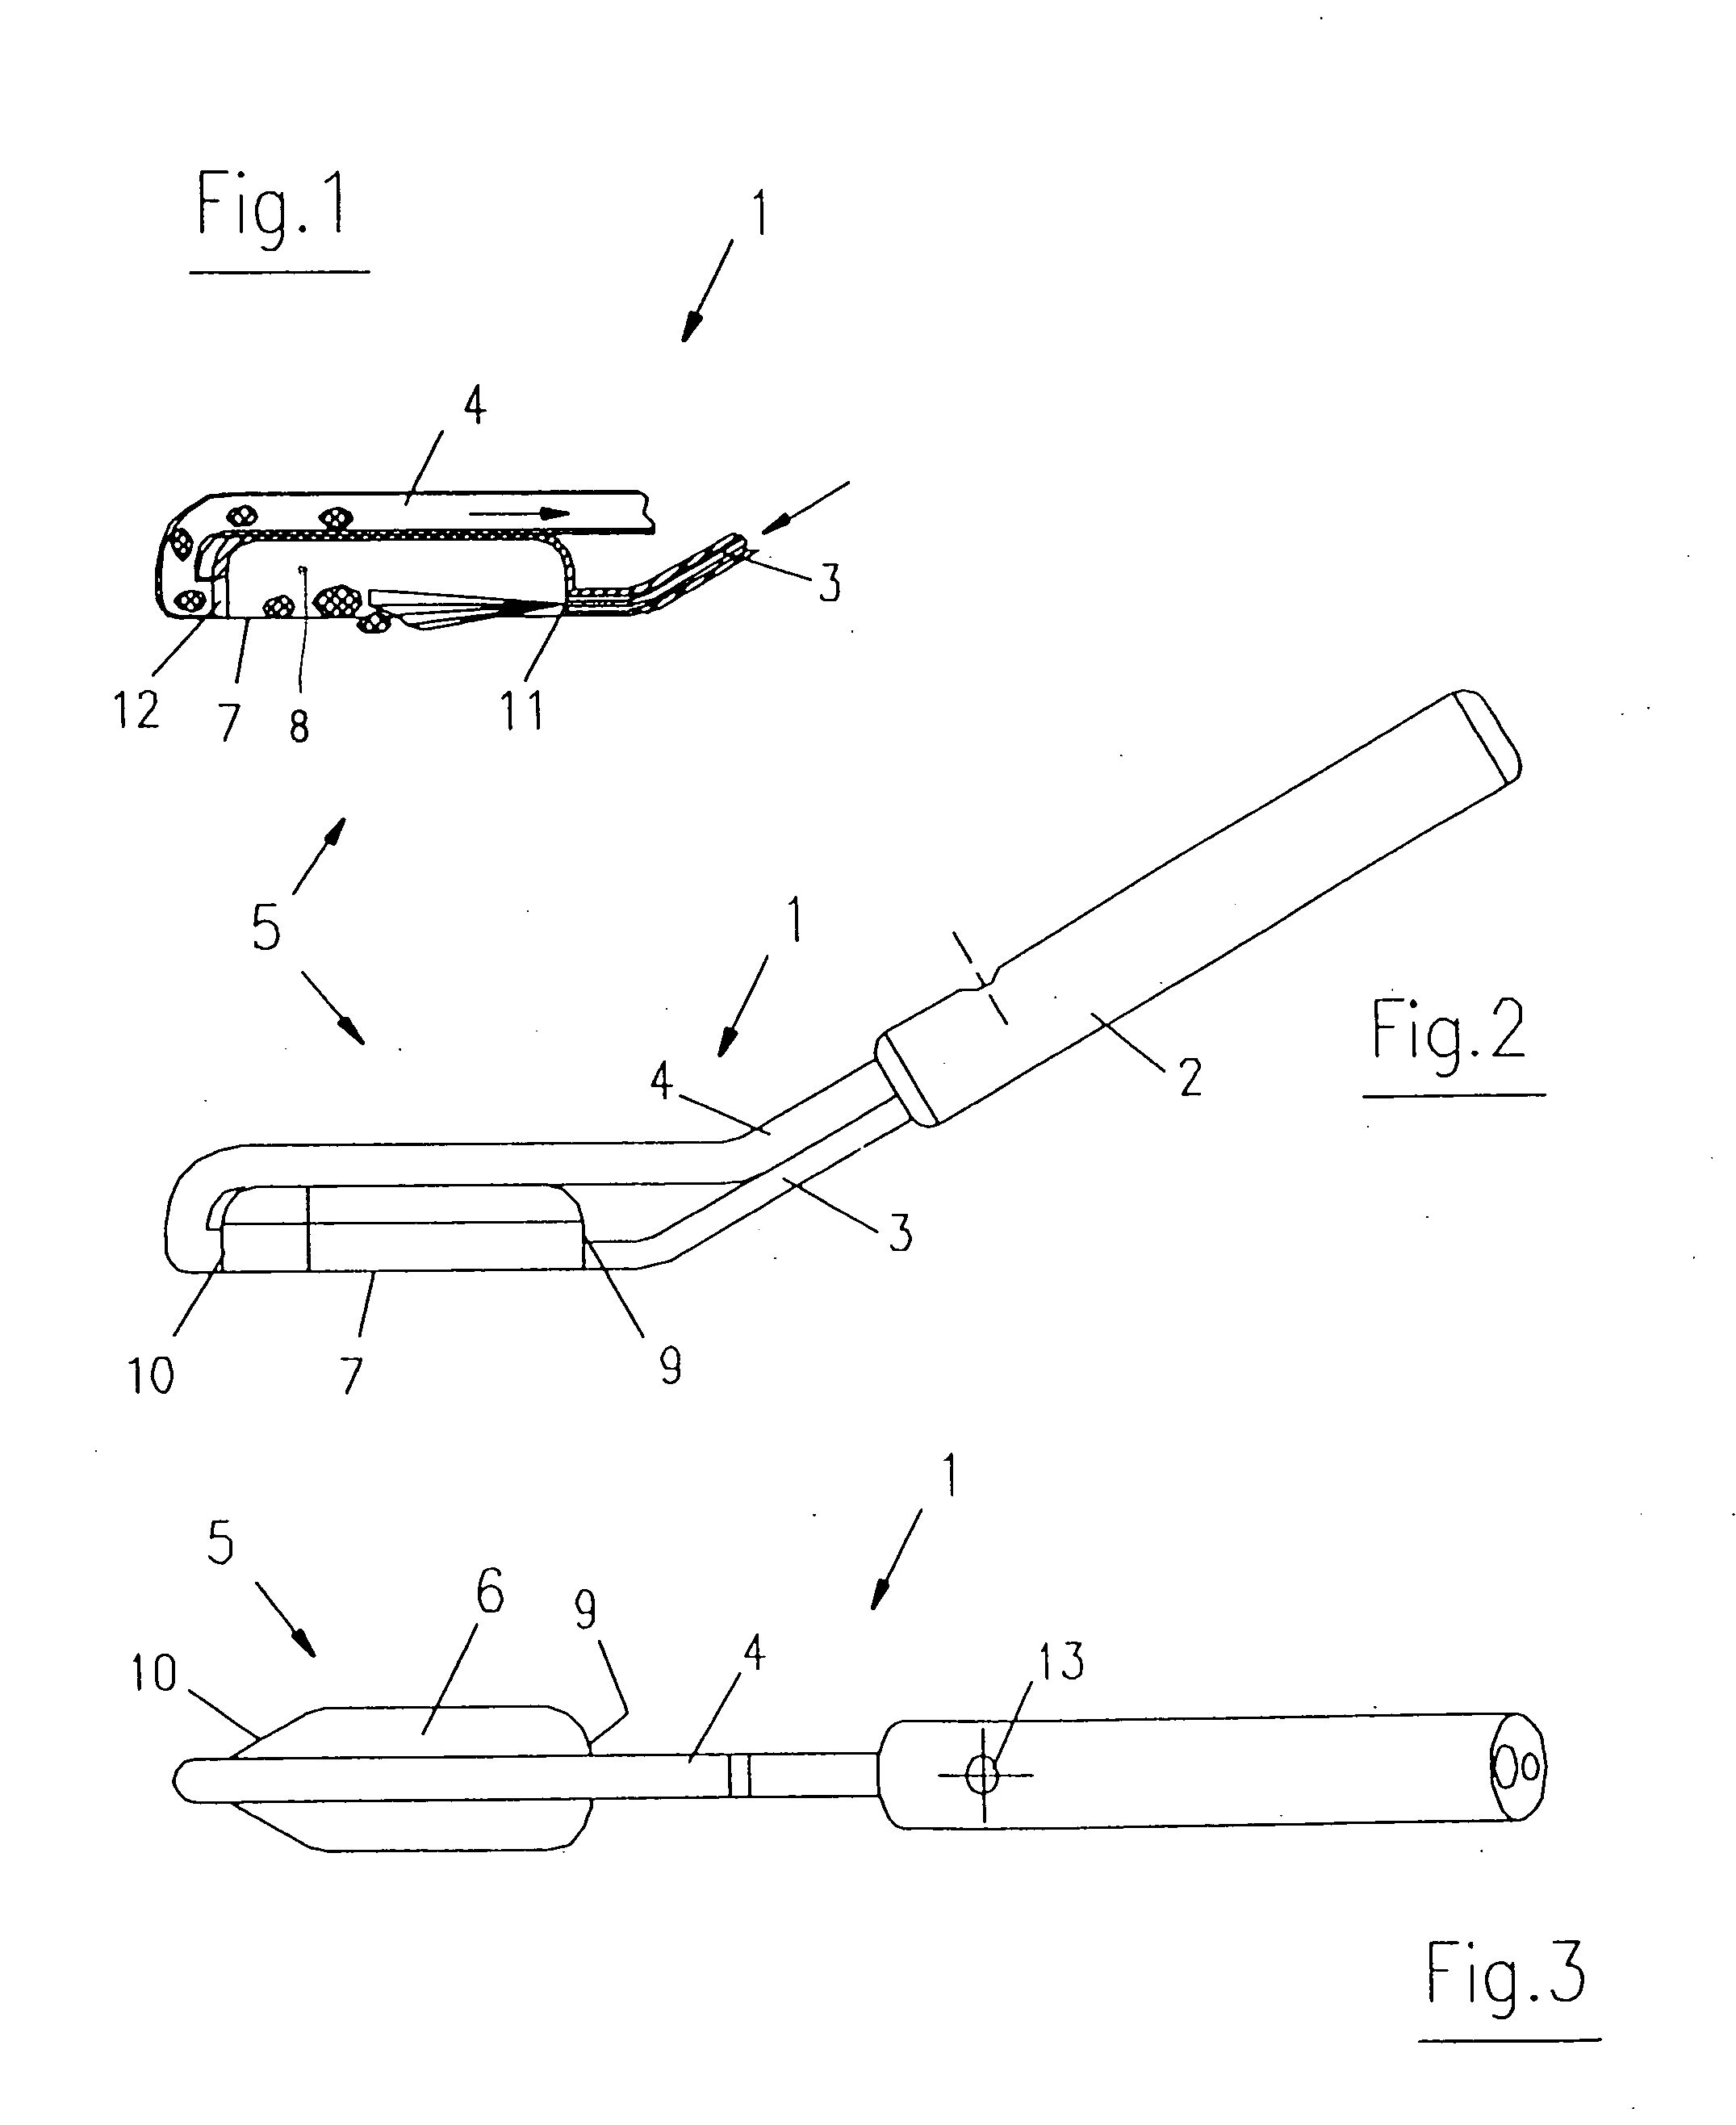 Applicator for a water jet separating apparatus